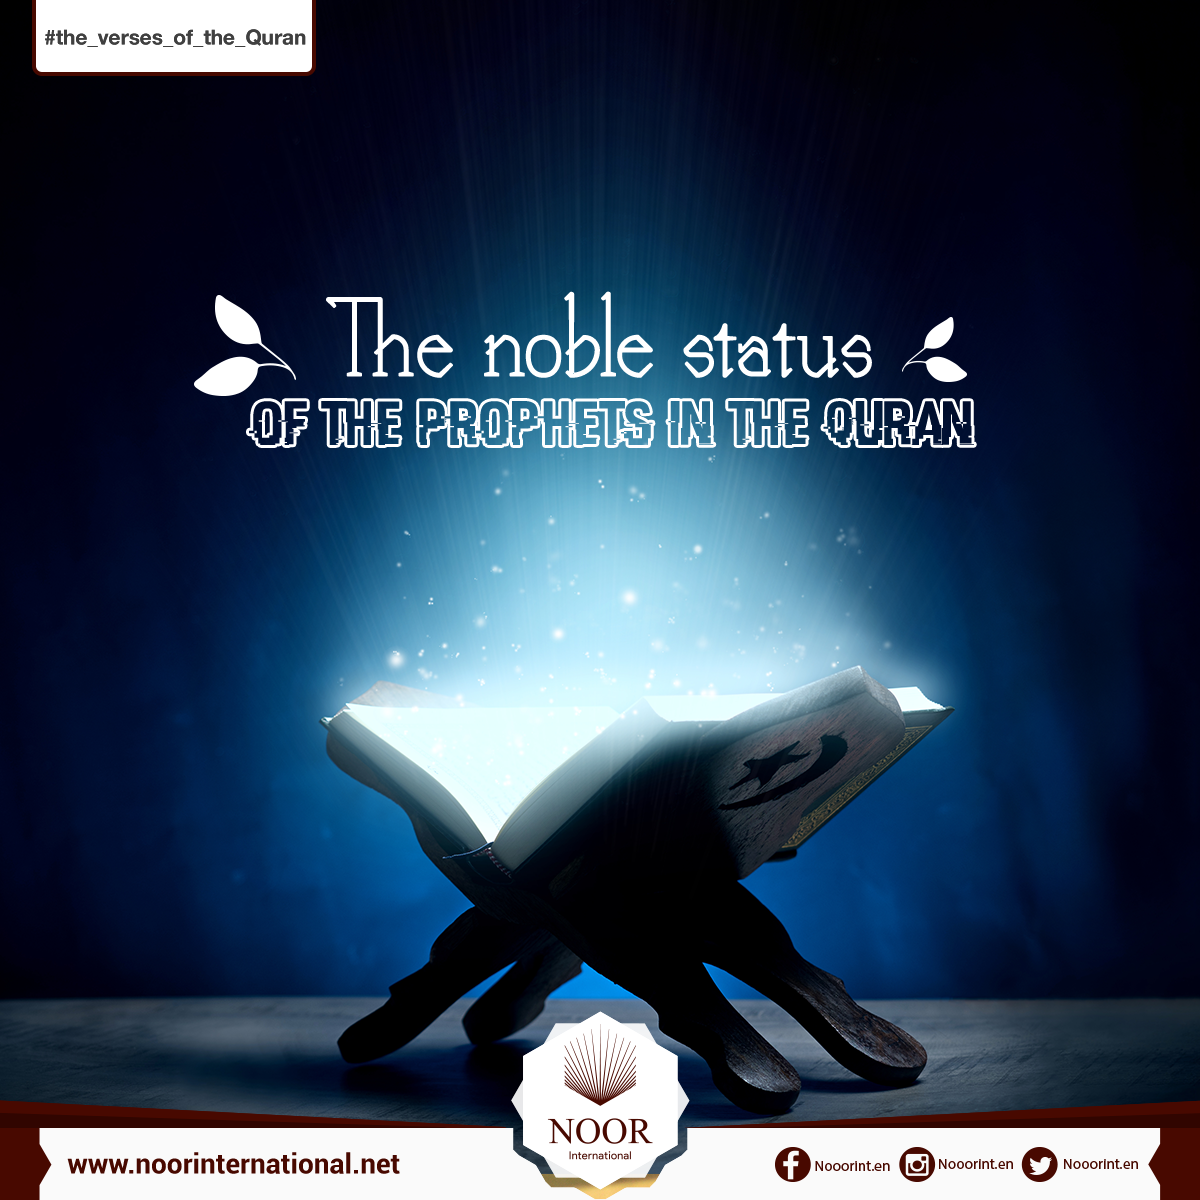 The noble status of the Prophets in the Quran